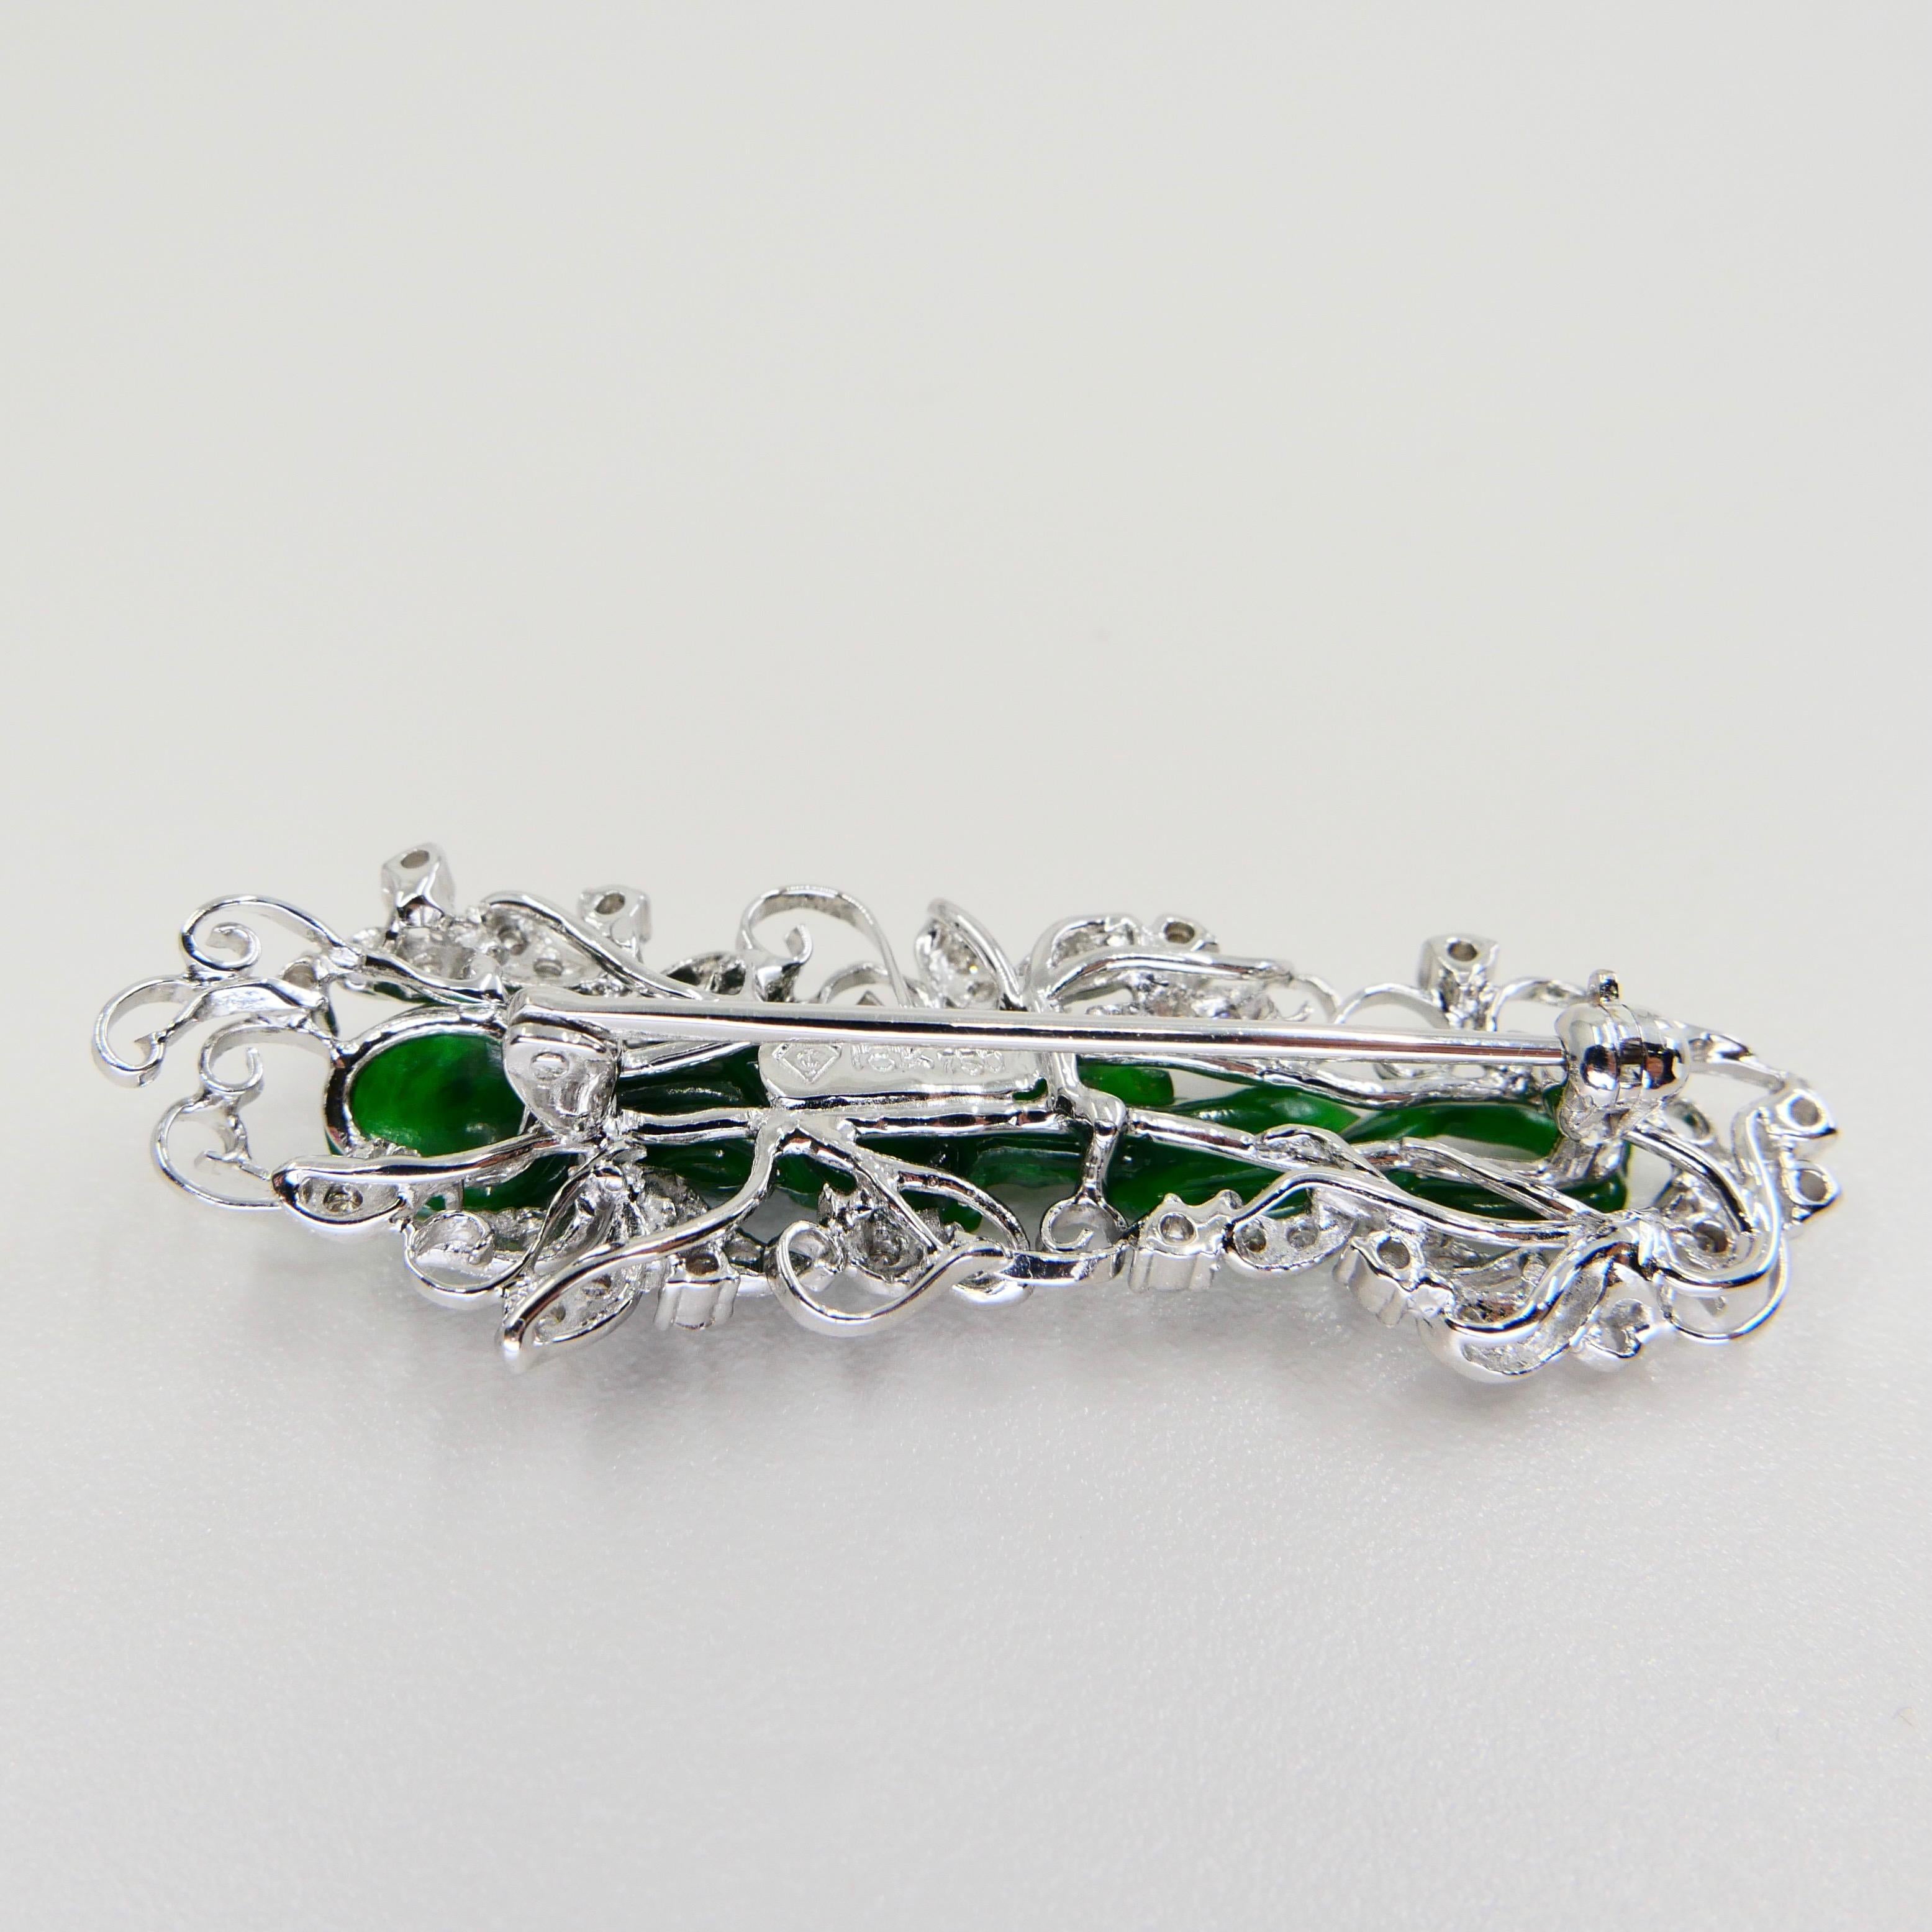 Certified Intense Green Carved Jade & Diamond Brooch, Close to Imperial Green For Sale 1